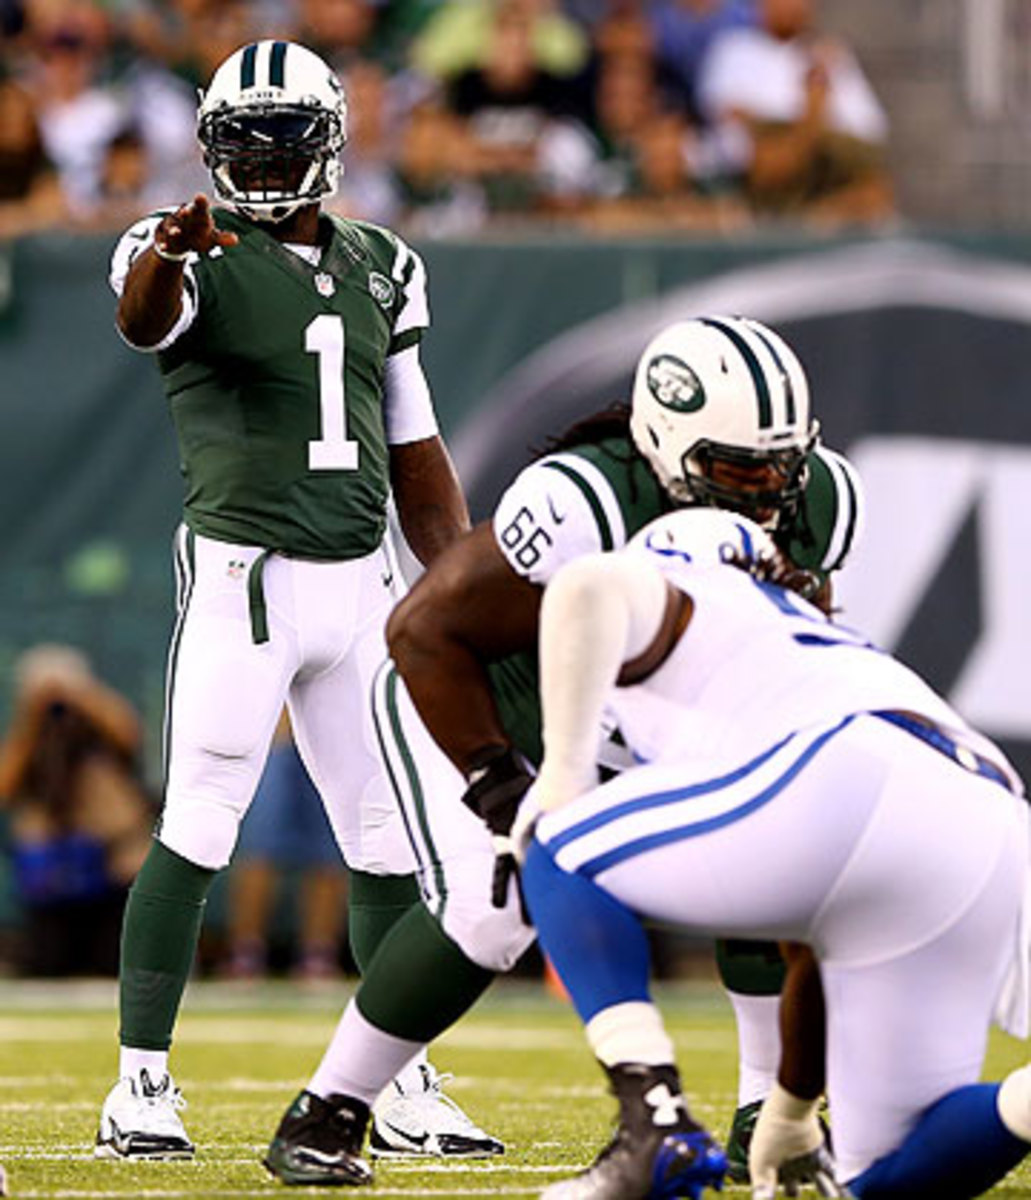 Michael Vick is competing for the starting quarterback job in Jets camp. (Elsa/Getty Images)